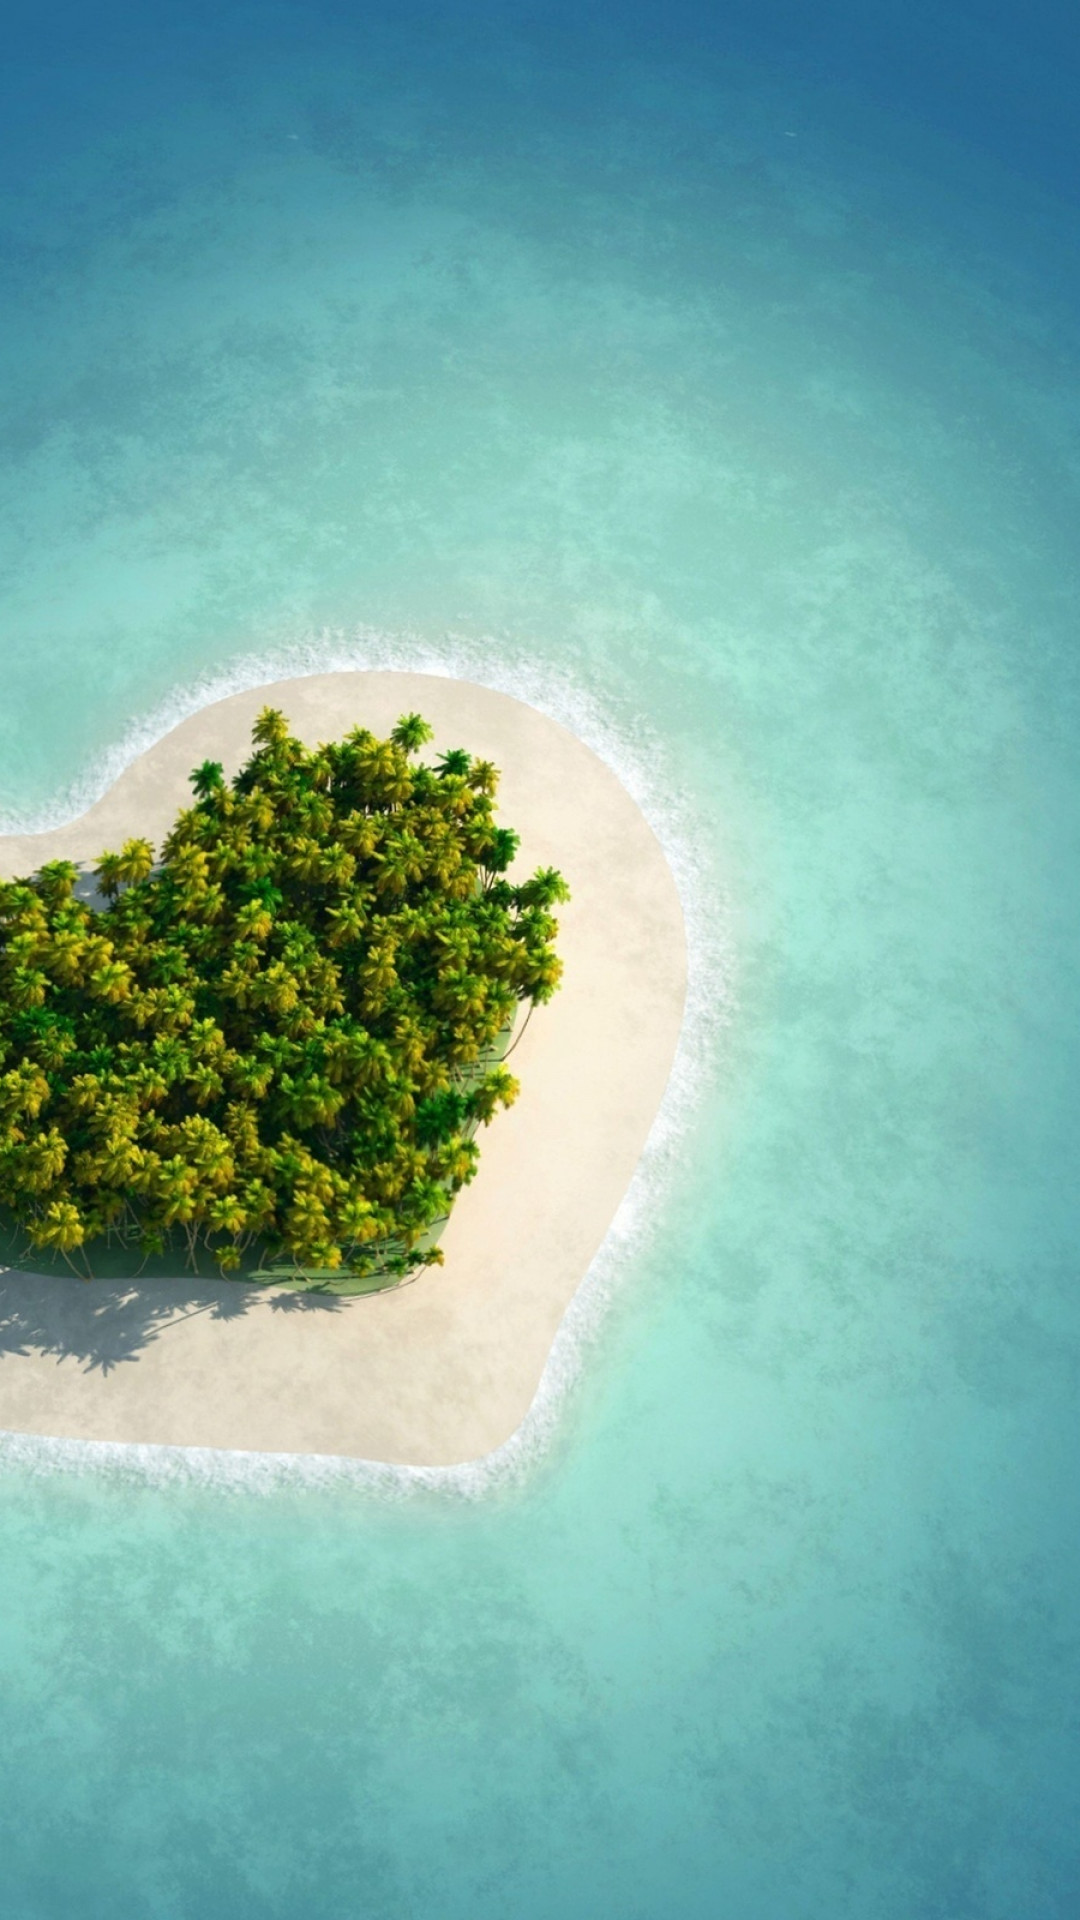 Stock Images love image, heart, HD, island, ocean, Stock Images #14851